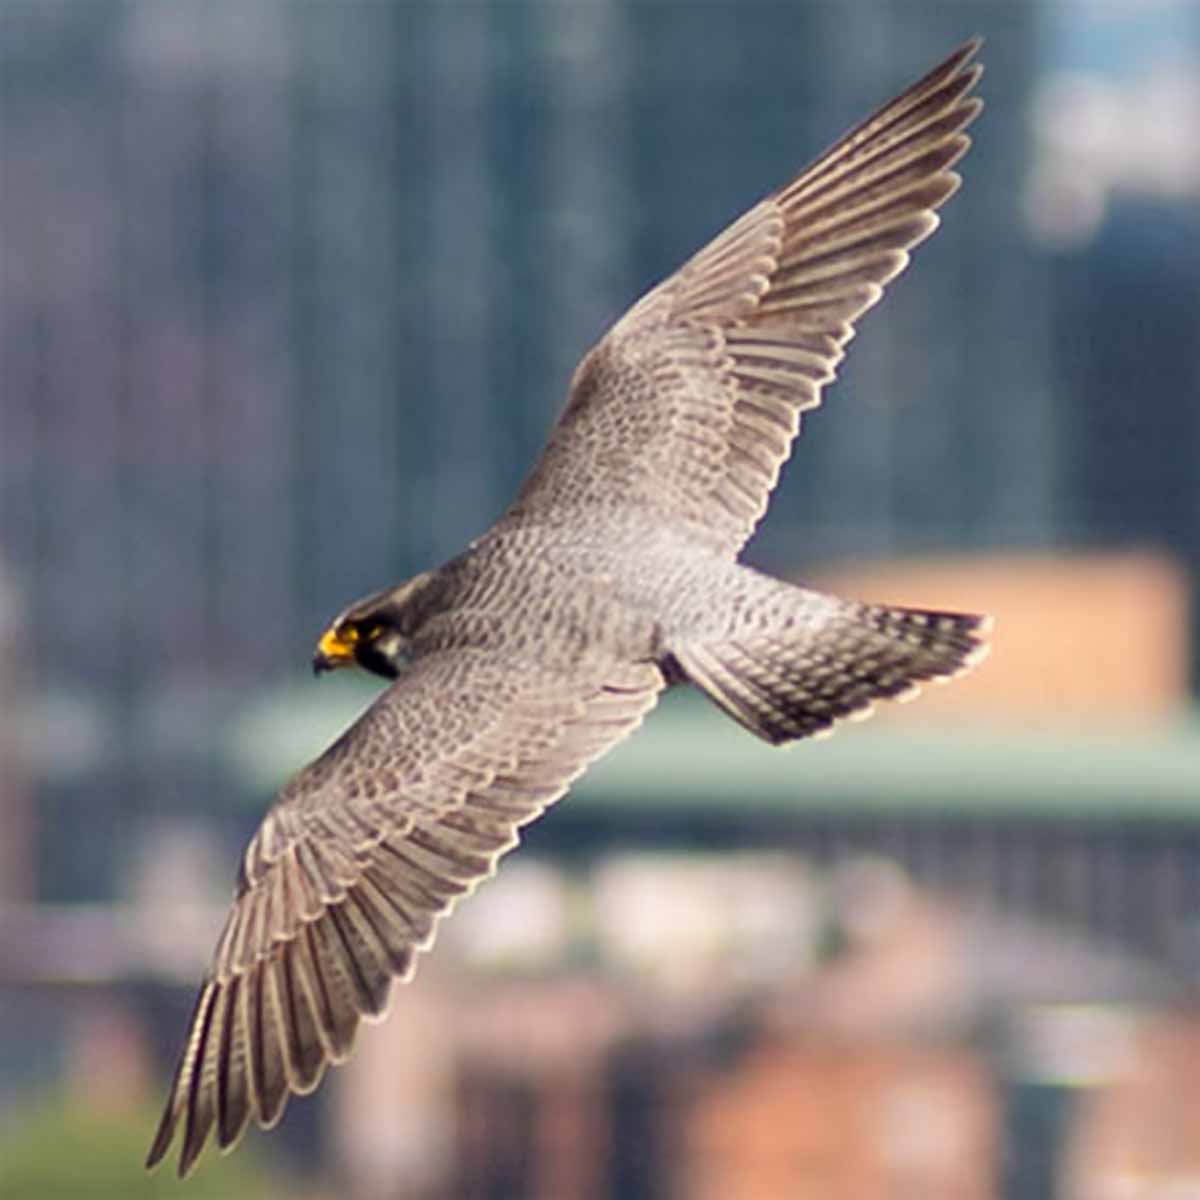 The image shows a peregrine falcon soaring gracefully over the Charles River campus of Boston University. The falcon is the focal point, with its sleek, streamlined body (of neutral off-white and neutral brown feathers) and distinctive hooked beak clearly visible. Its wings are outstretched, propelling it effortlessly through the air. The background is slightly out of focus, but suggests an urban, built-up environment, likely the buildings and infrastructure of the university campus. Peregrine falcons have made a remarkable comeback in recent decades, with nesting pairs now found in many major cities. 